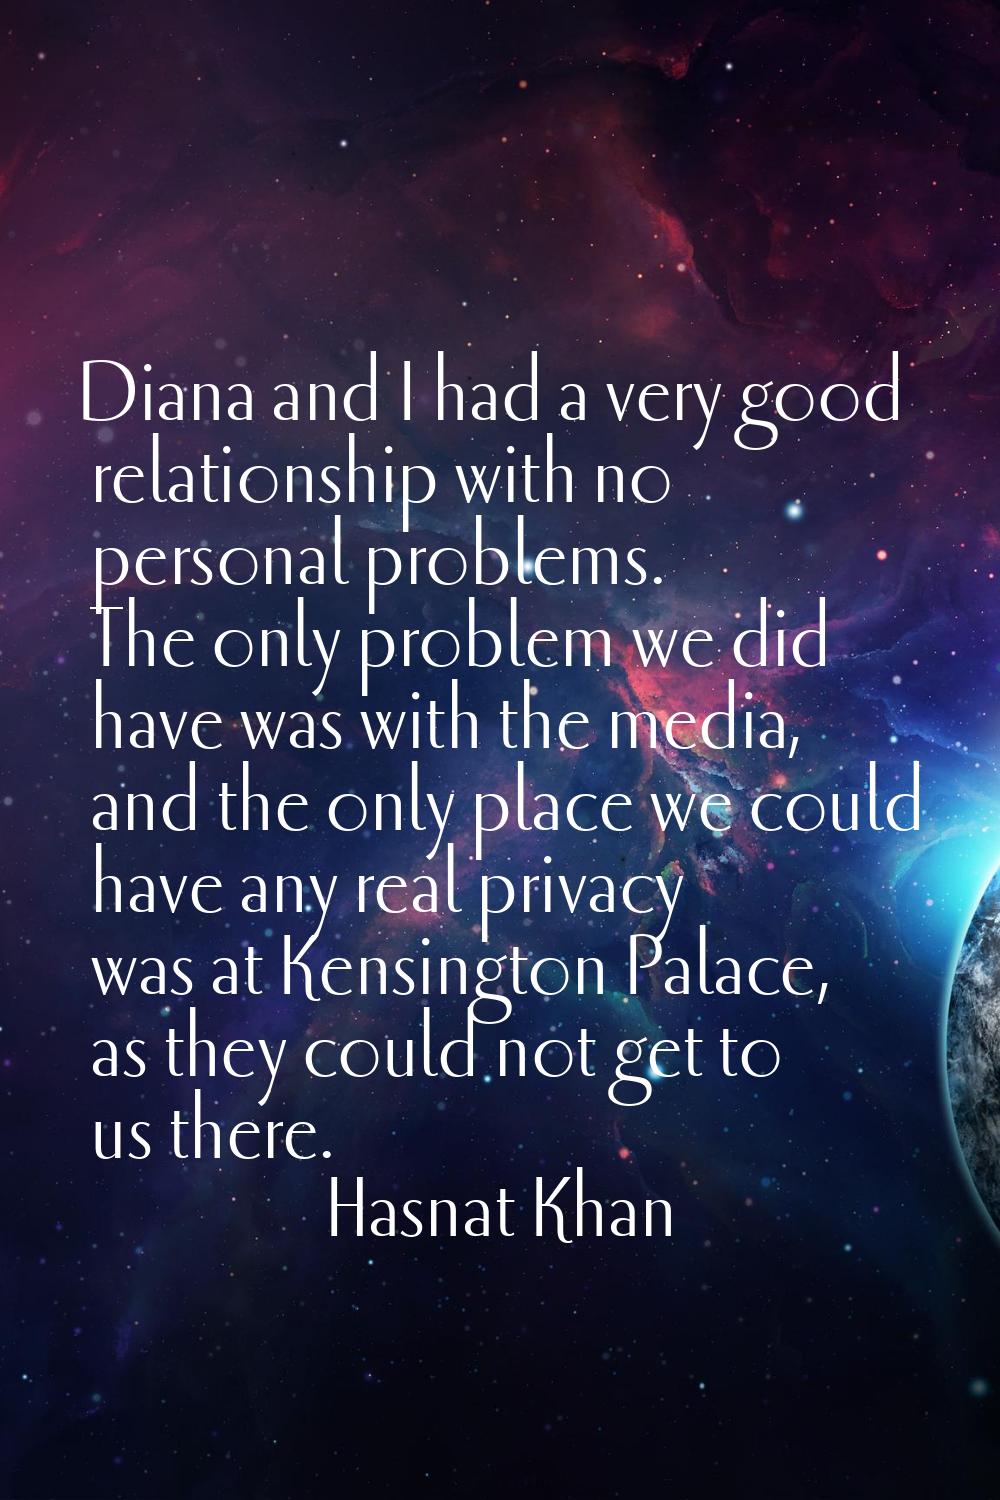 Diana and I had a very good relationship with no personal problems. The only problem we did have wa